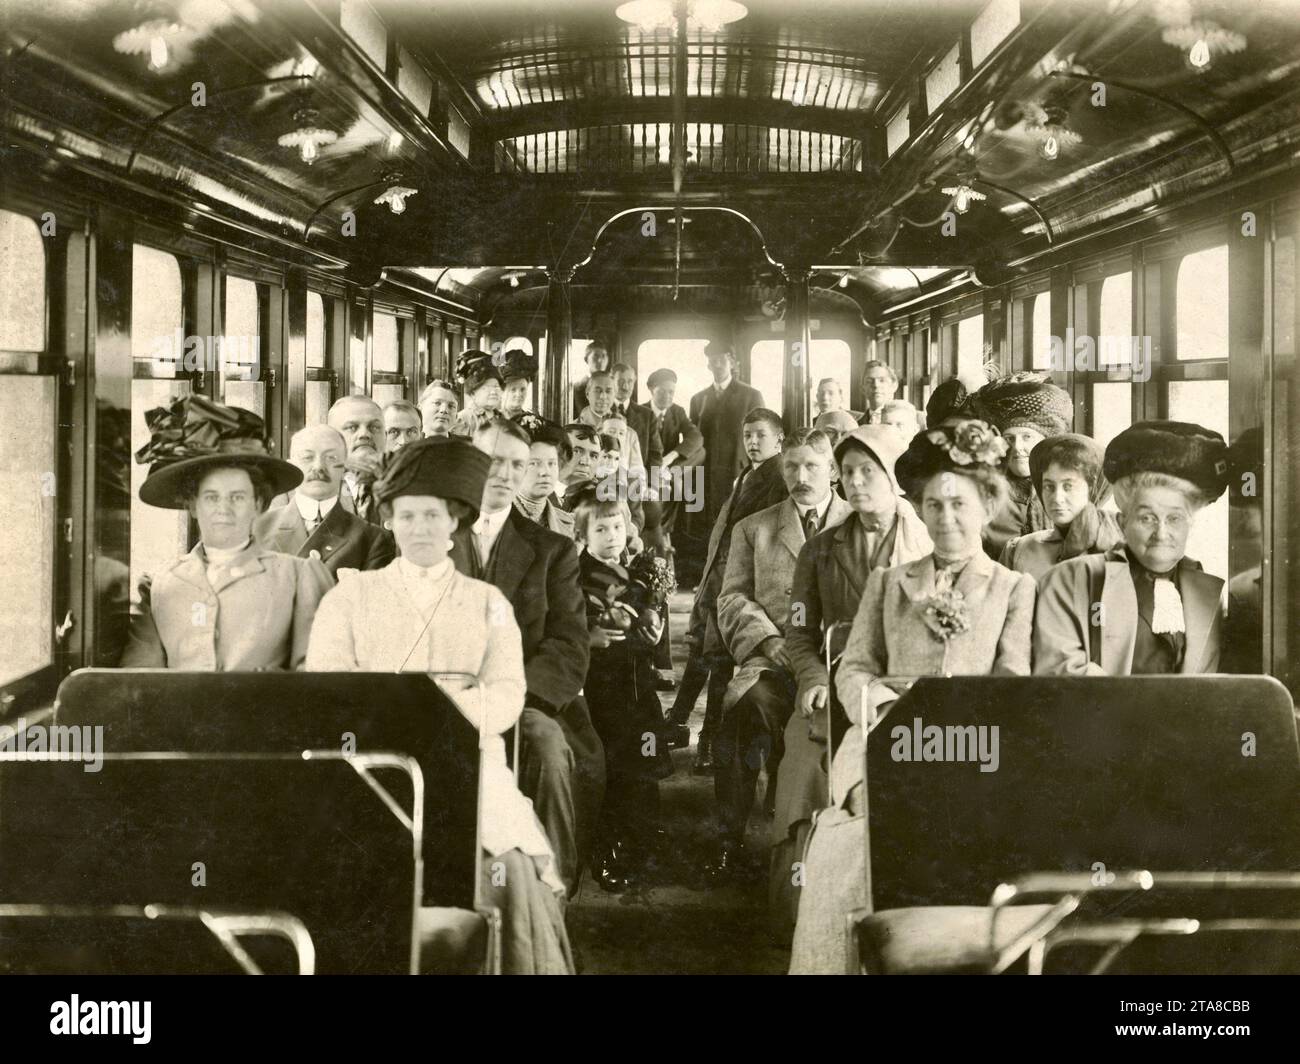 People 1900, Transportation 1900, Commuters, Trolley or Train Car Interior Stock Photo